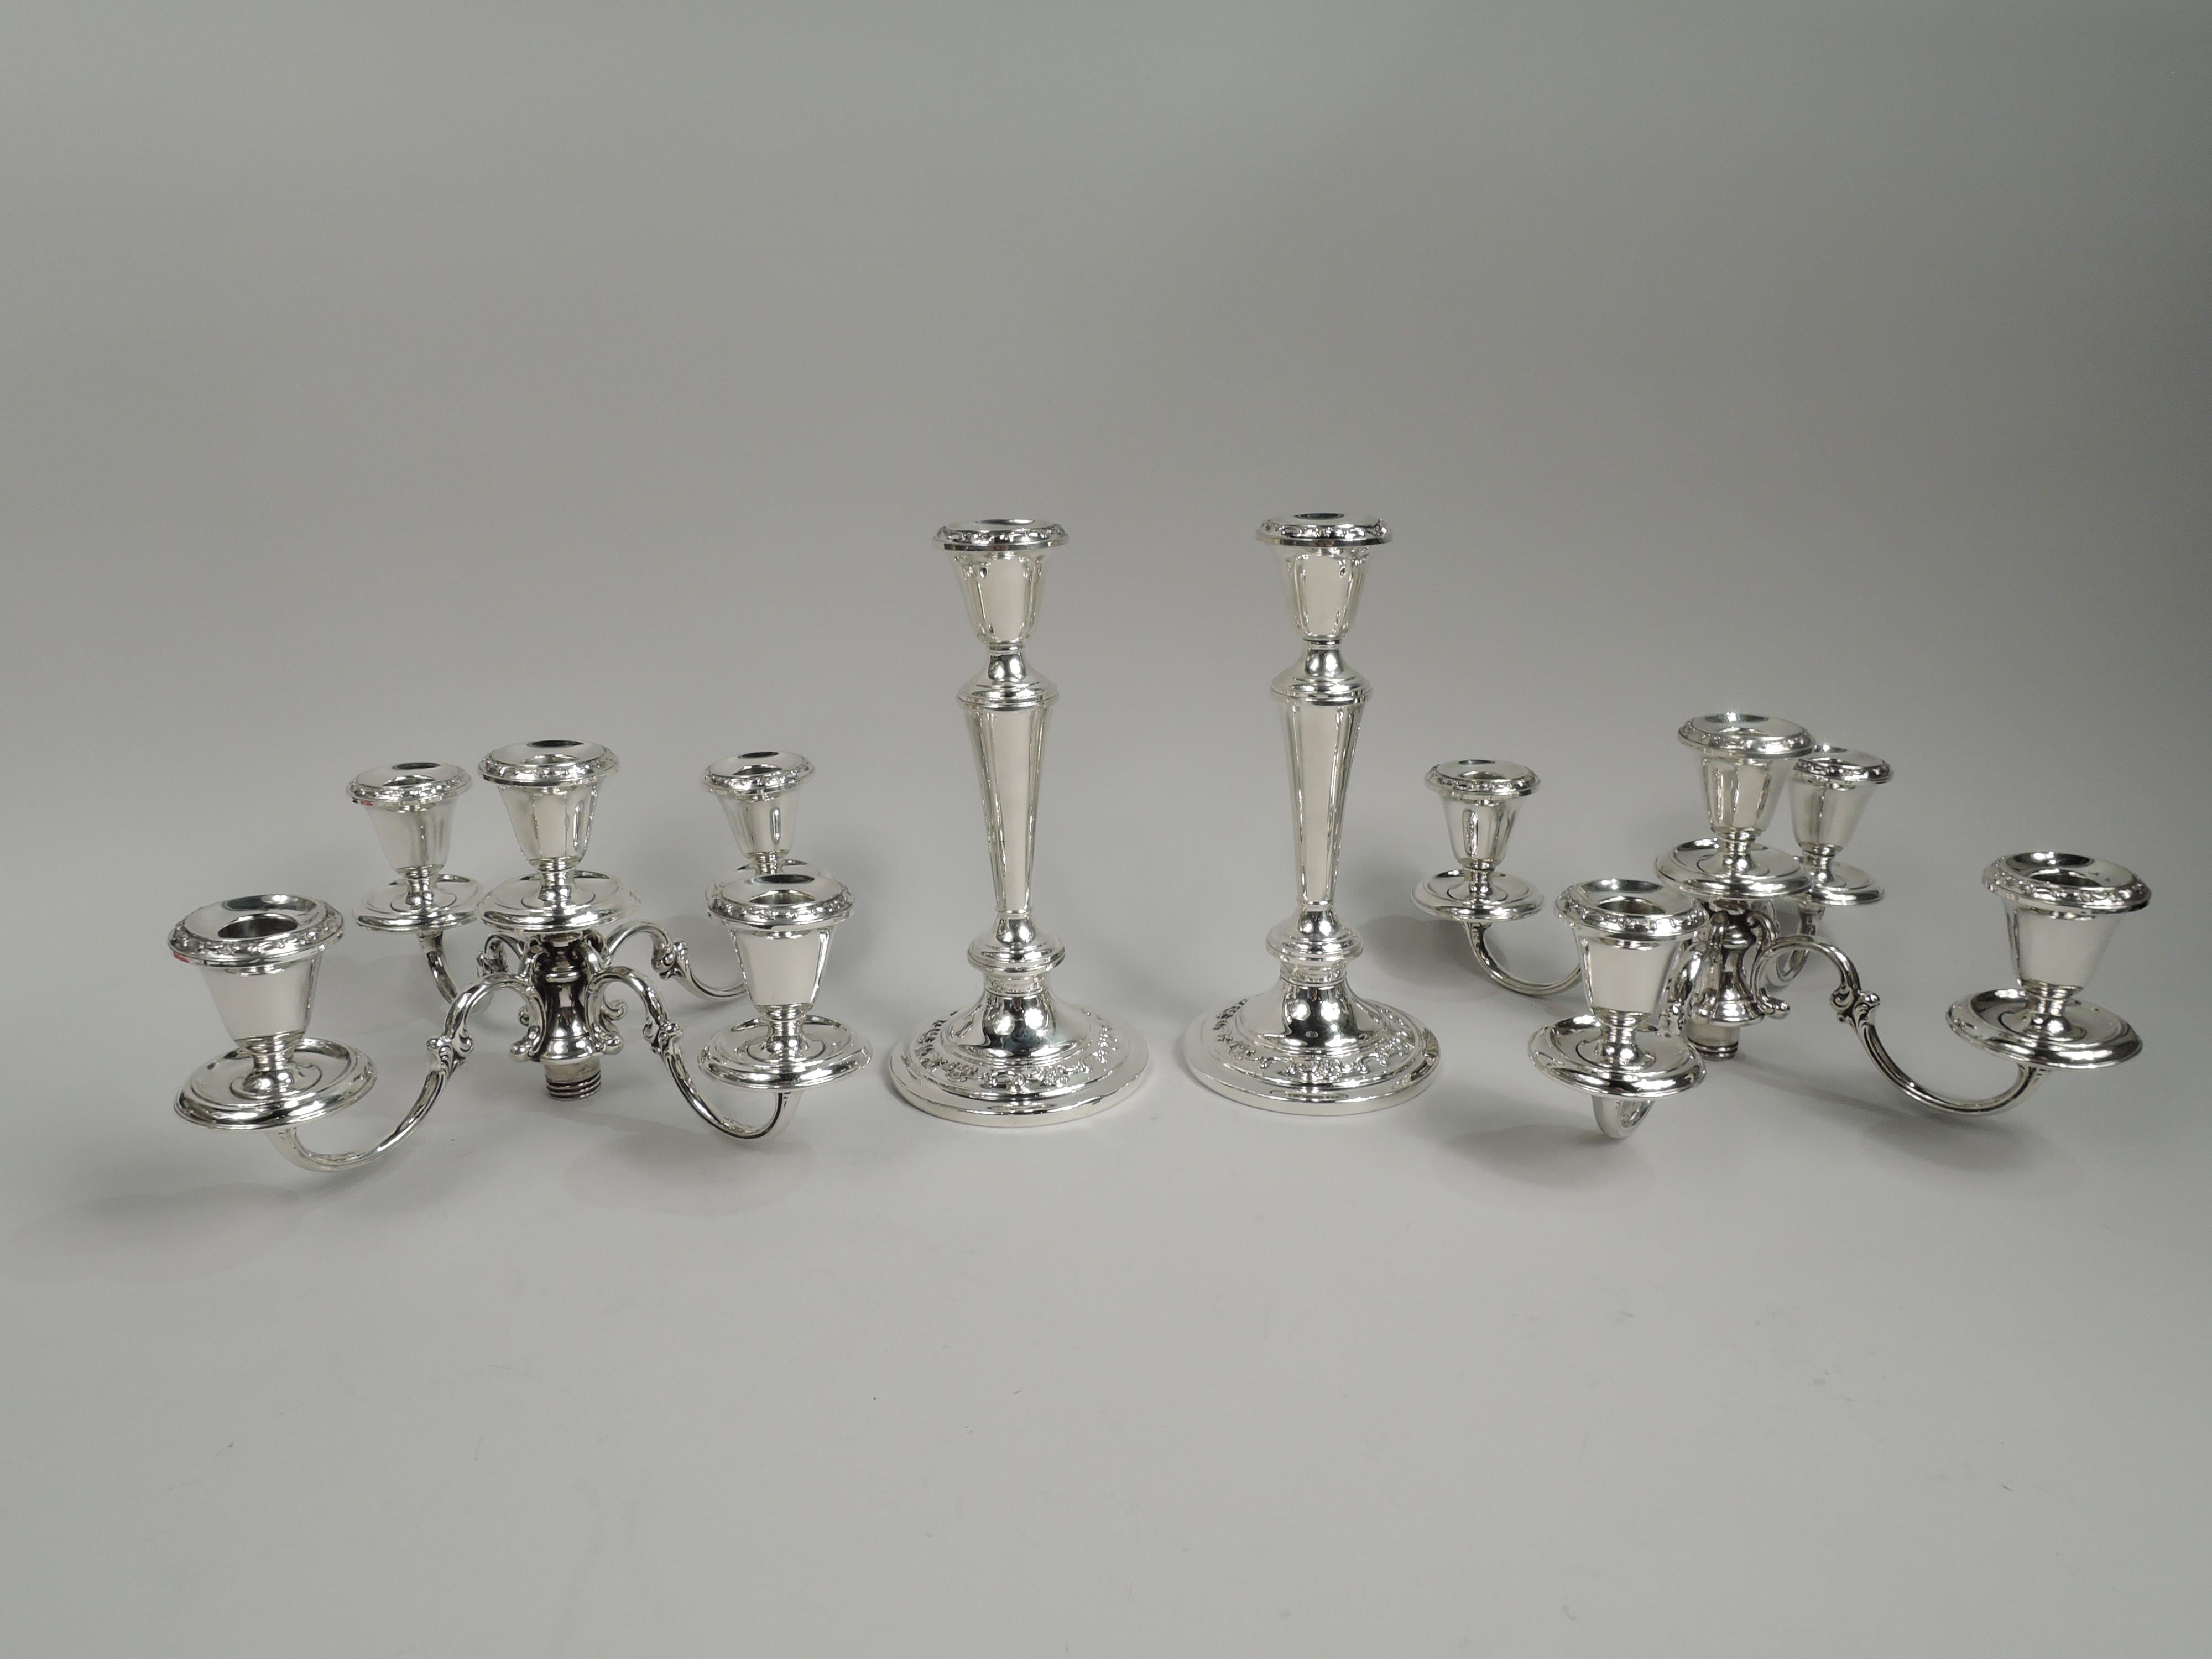 Pair of Strasbourg sterling silver 5-light candelabra. Made by Gorham in Providence. Each: Knopped and tapering shaft on raised foot; four s-scroll arms, each terminating in single socket mounted to wax pan surrounding central raised socket. Raised